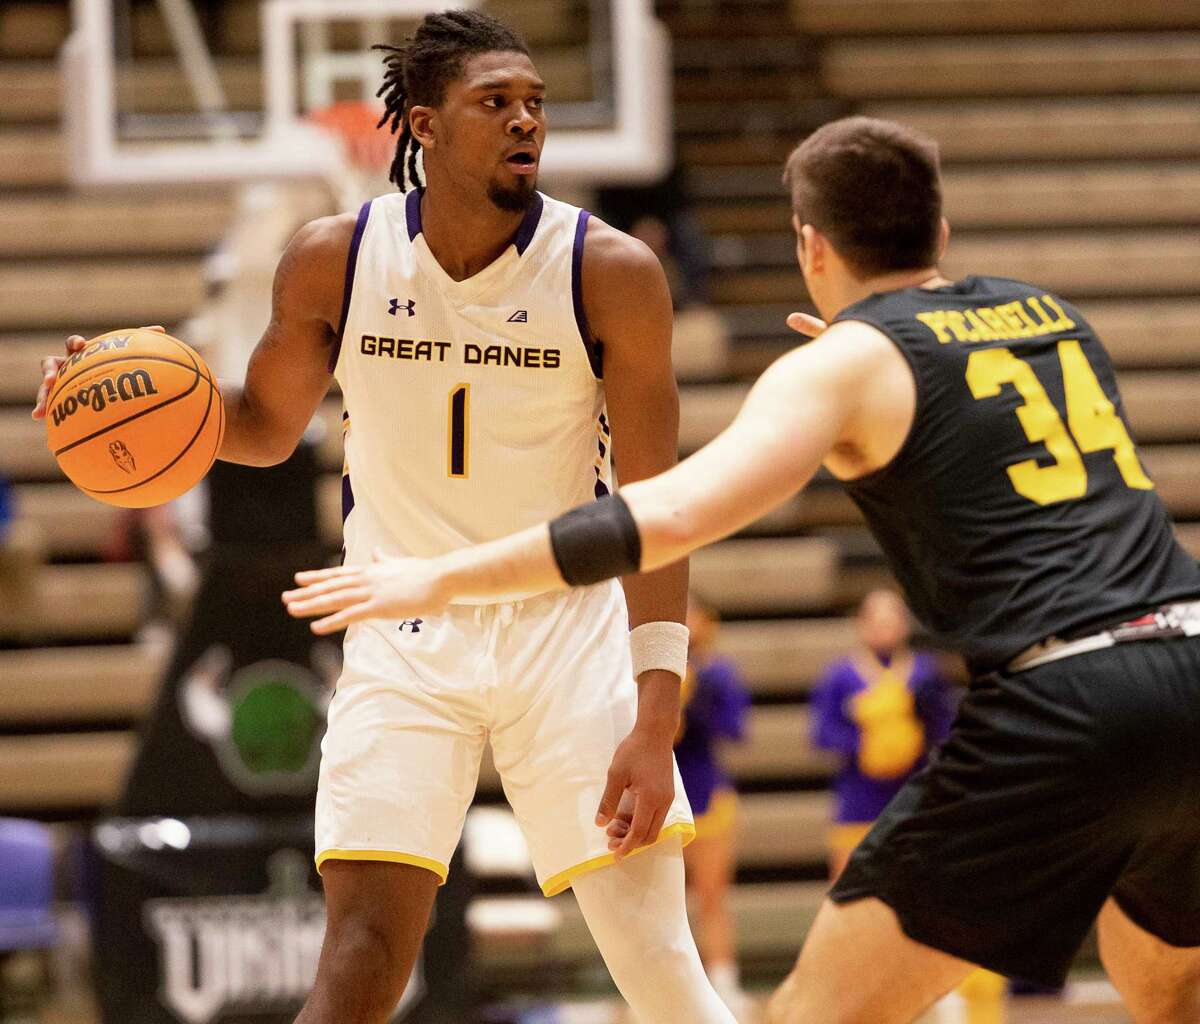 UAlbany’s Gerald Drumgoole Jr. is one of four seniors who will be honored before Saturday's game against NJIT. Drumgoole has eligibility remaining but hasn't decided whether or not to return for next season.